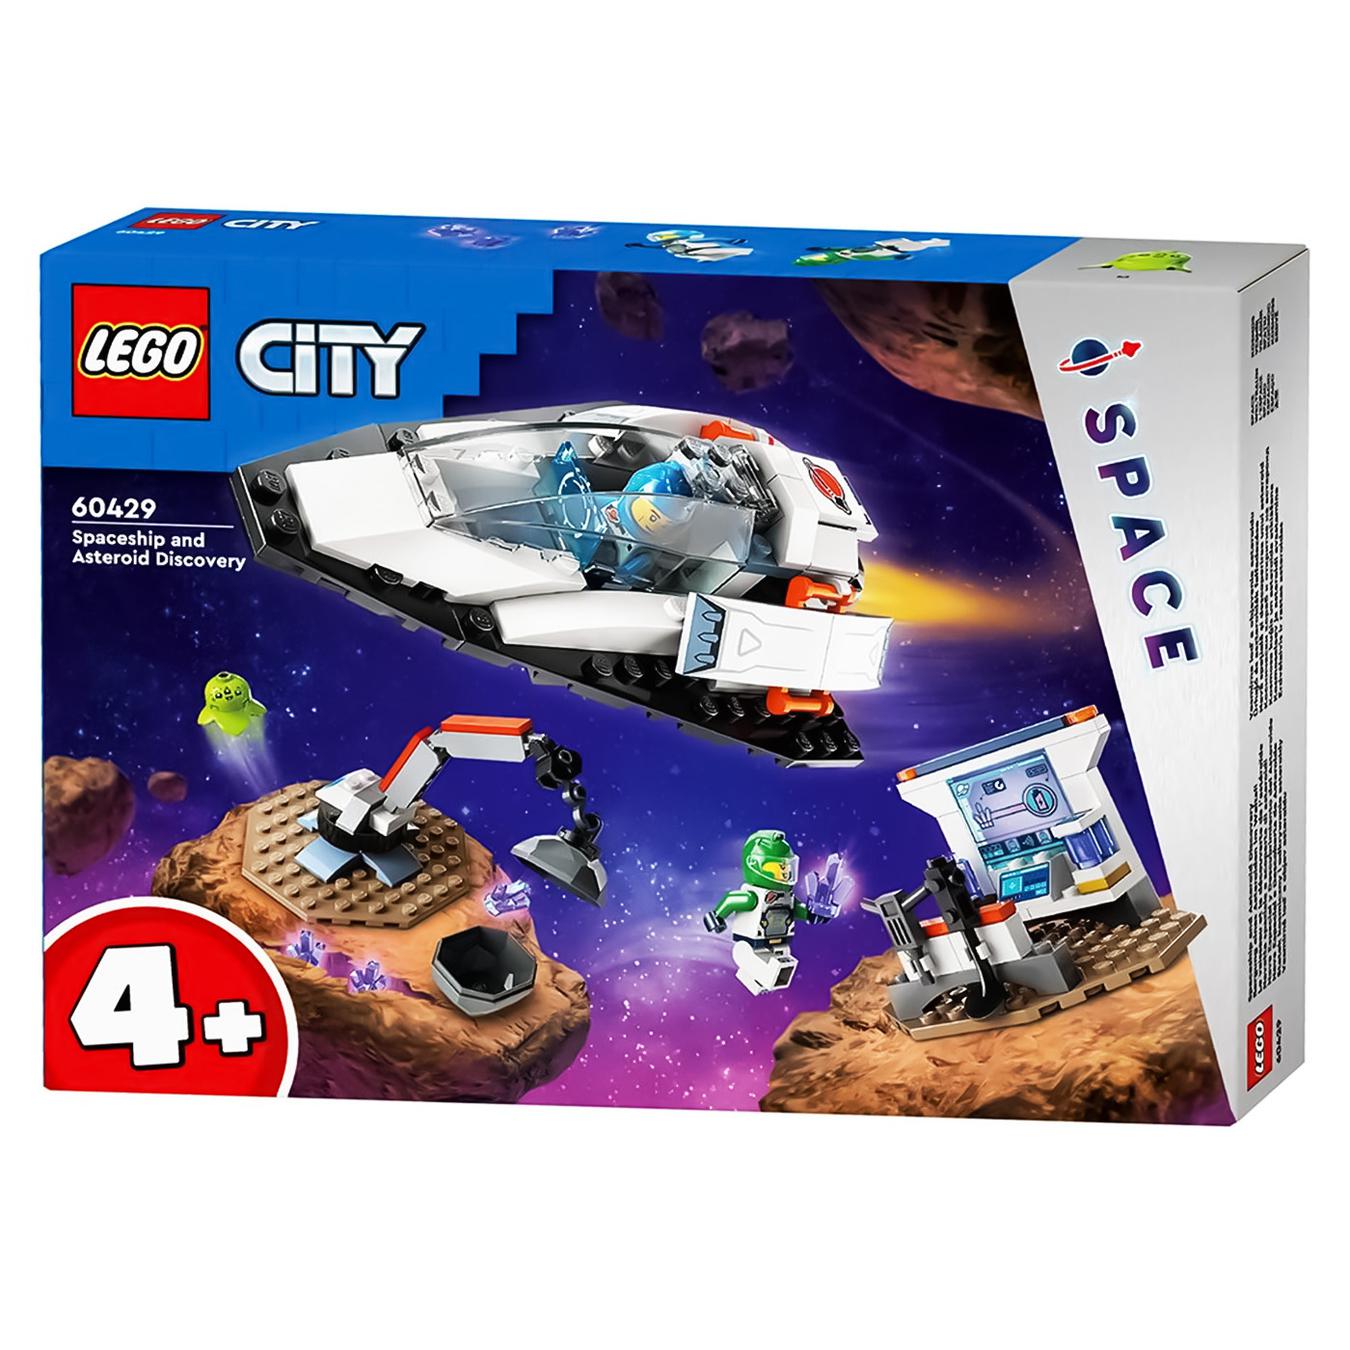 Constructor LEGO City 60429 Spaceship and asteroid exploration